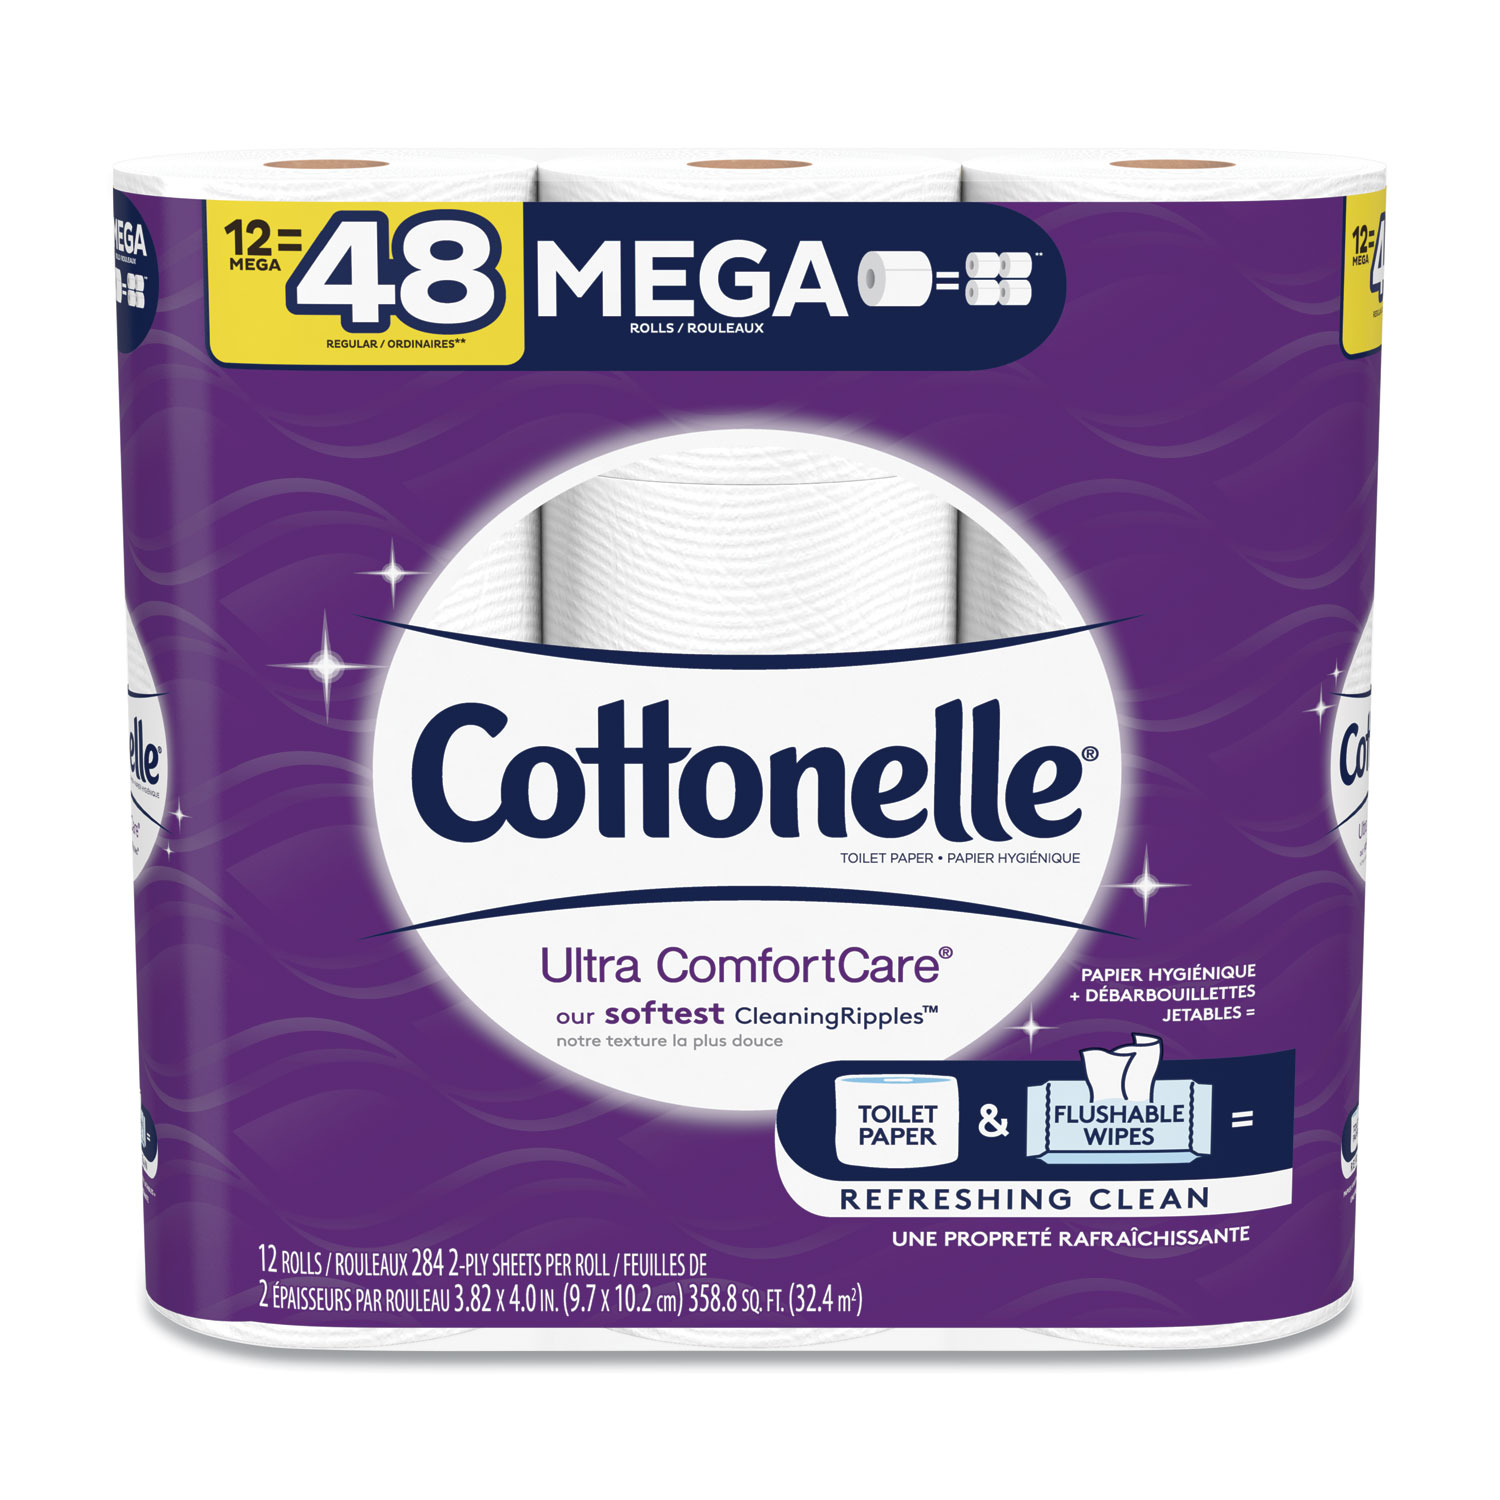 Cottonelle® Ultra ComfortCare Toilet Paper, Soft Tissue, Mega Rolls, Septic Safe, 2 Ply, White, 284 Sheets/Roll, 12 Rolls